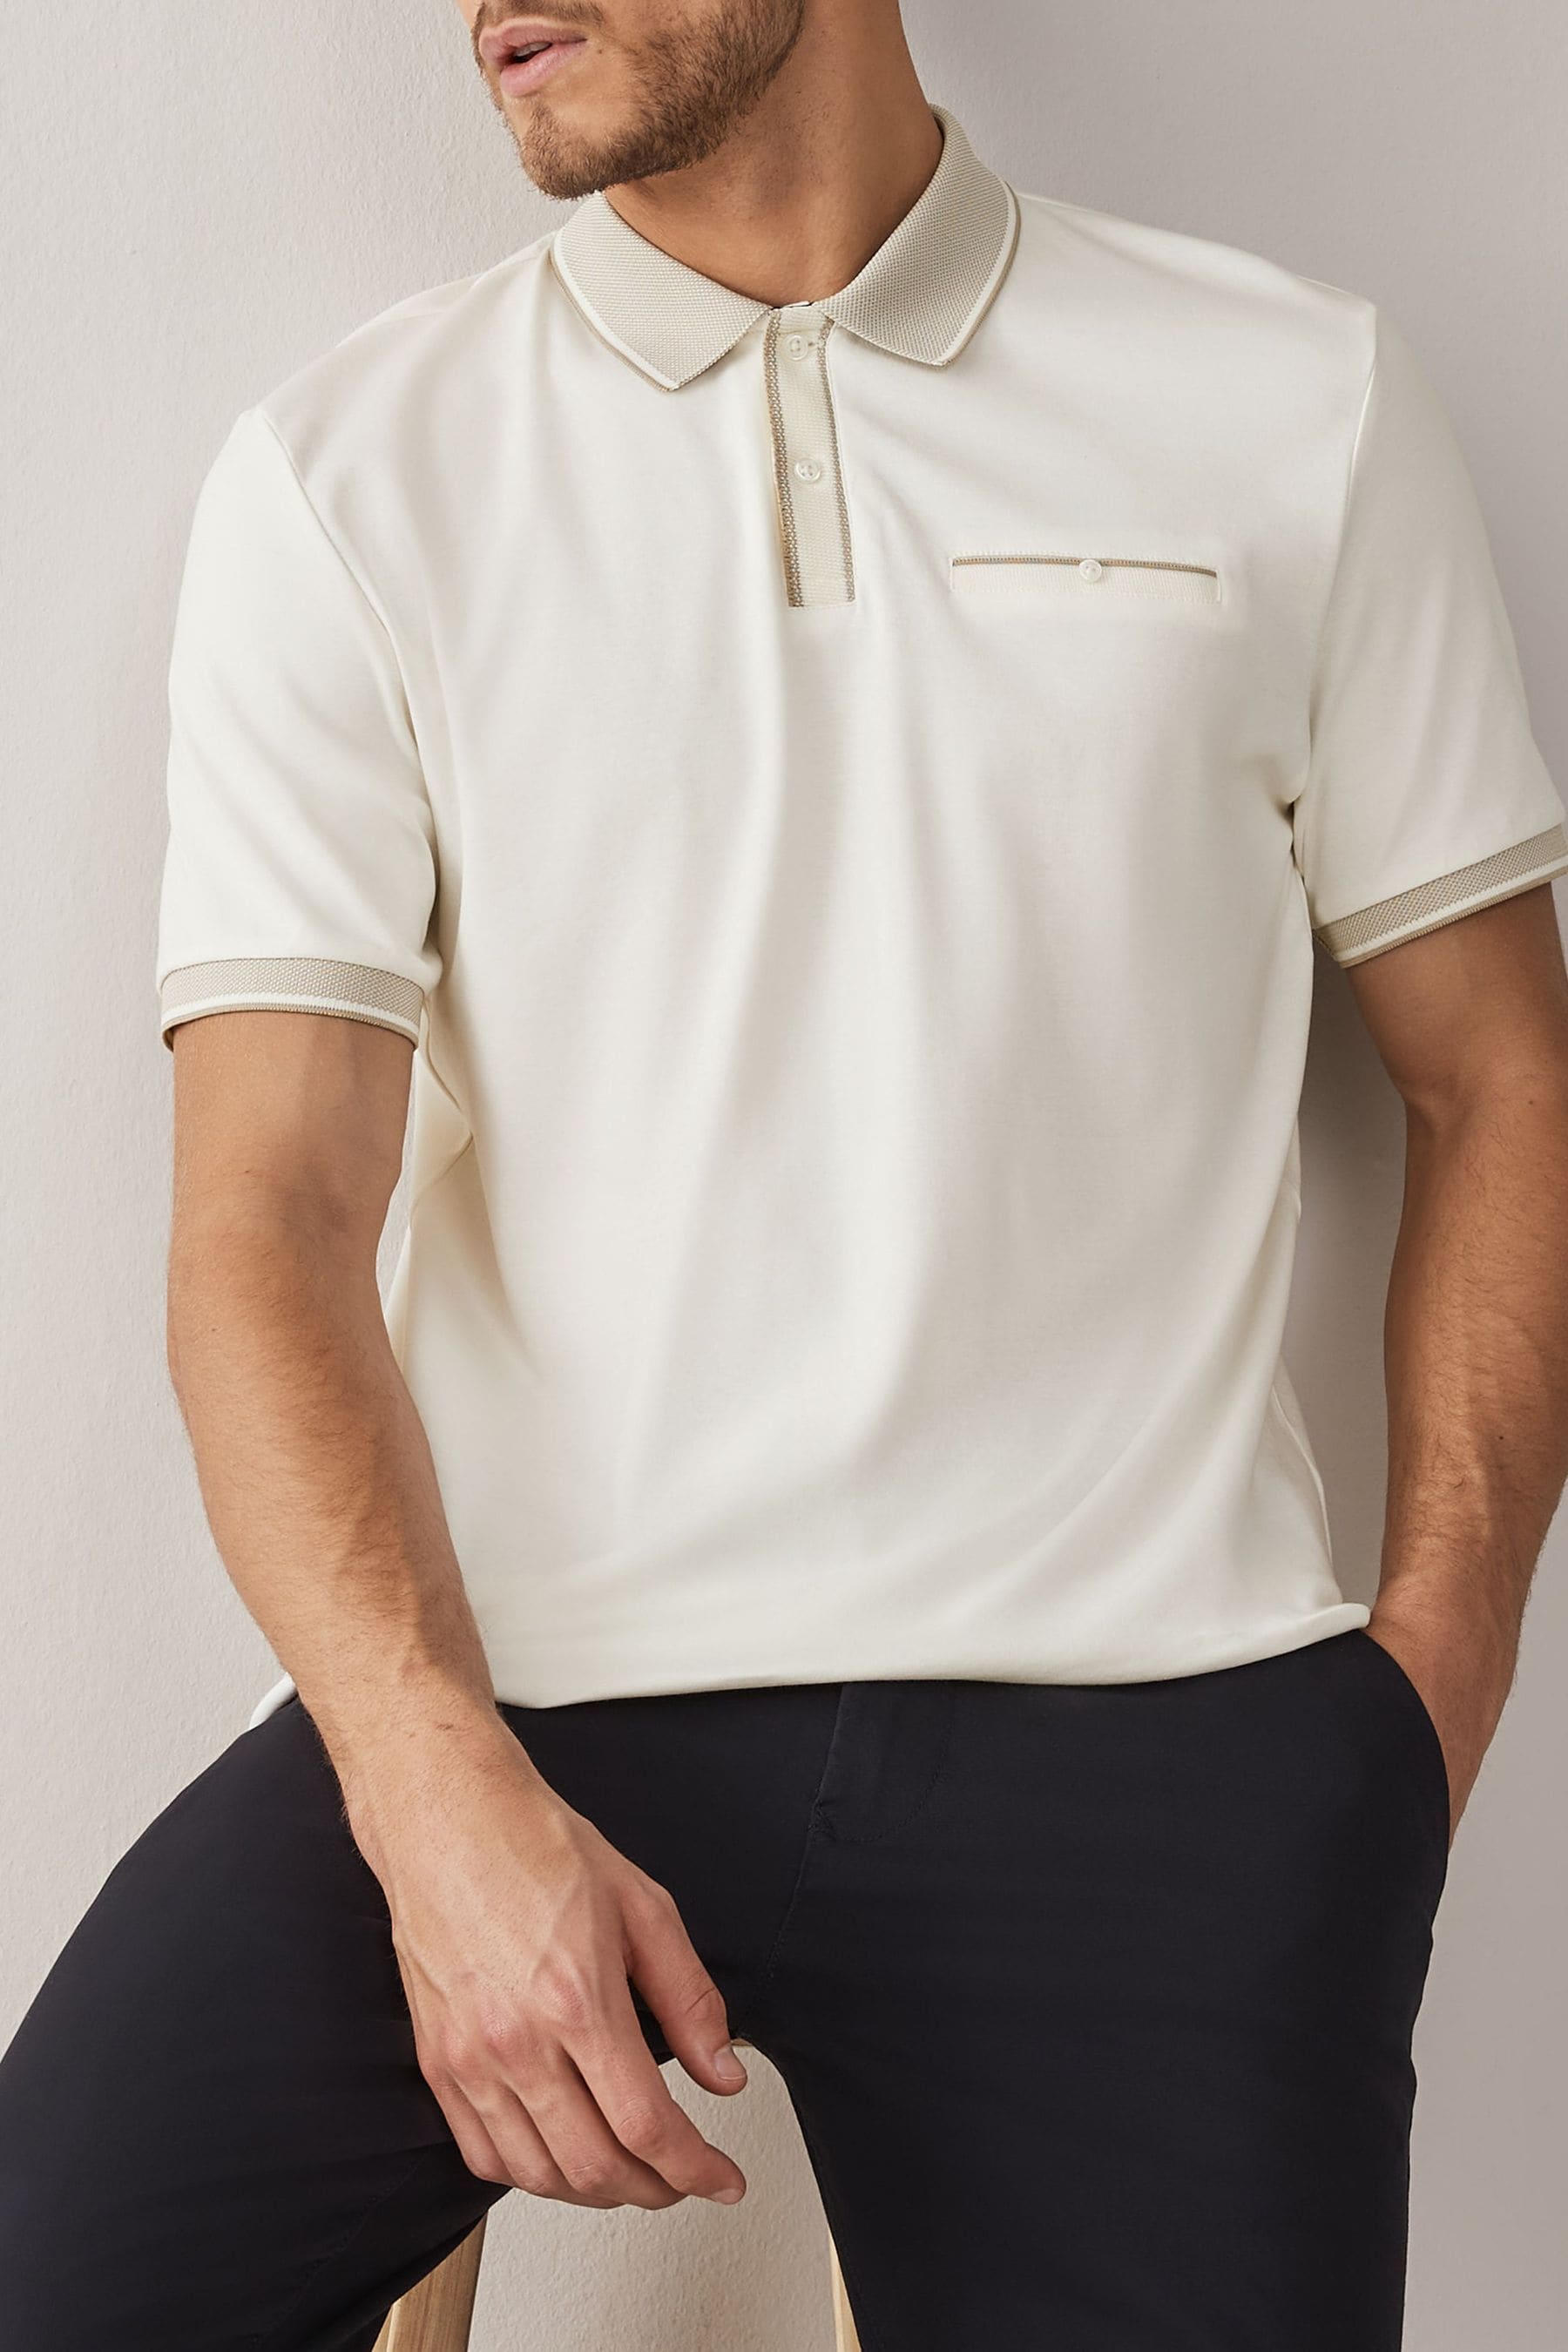 Buy Ecru White Smart Collar Polo Shirt from the Next UK online shop